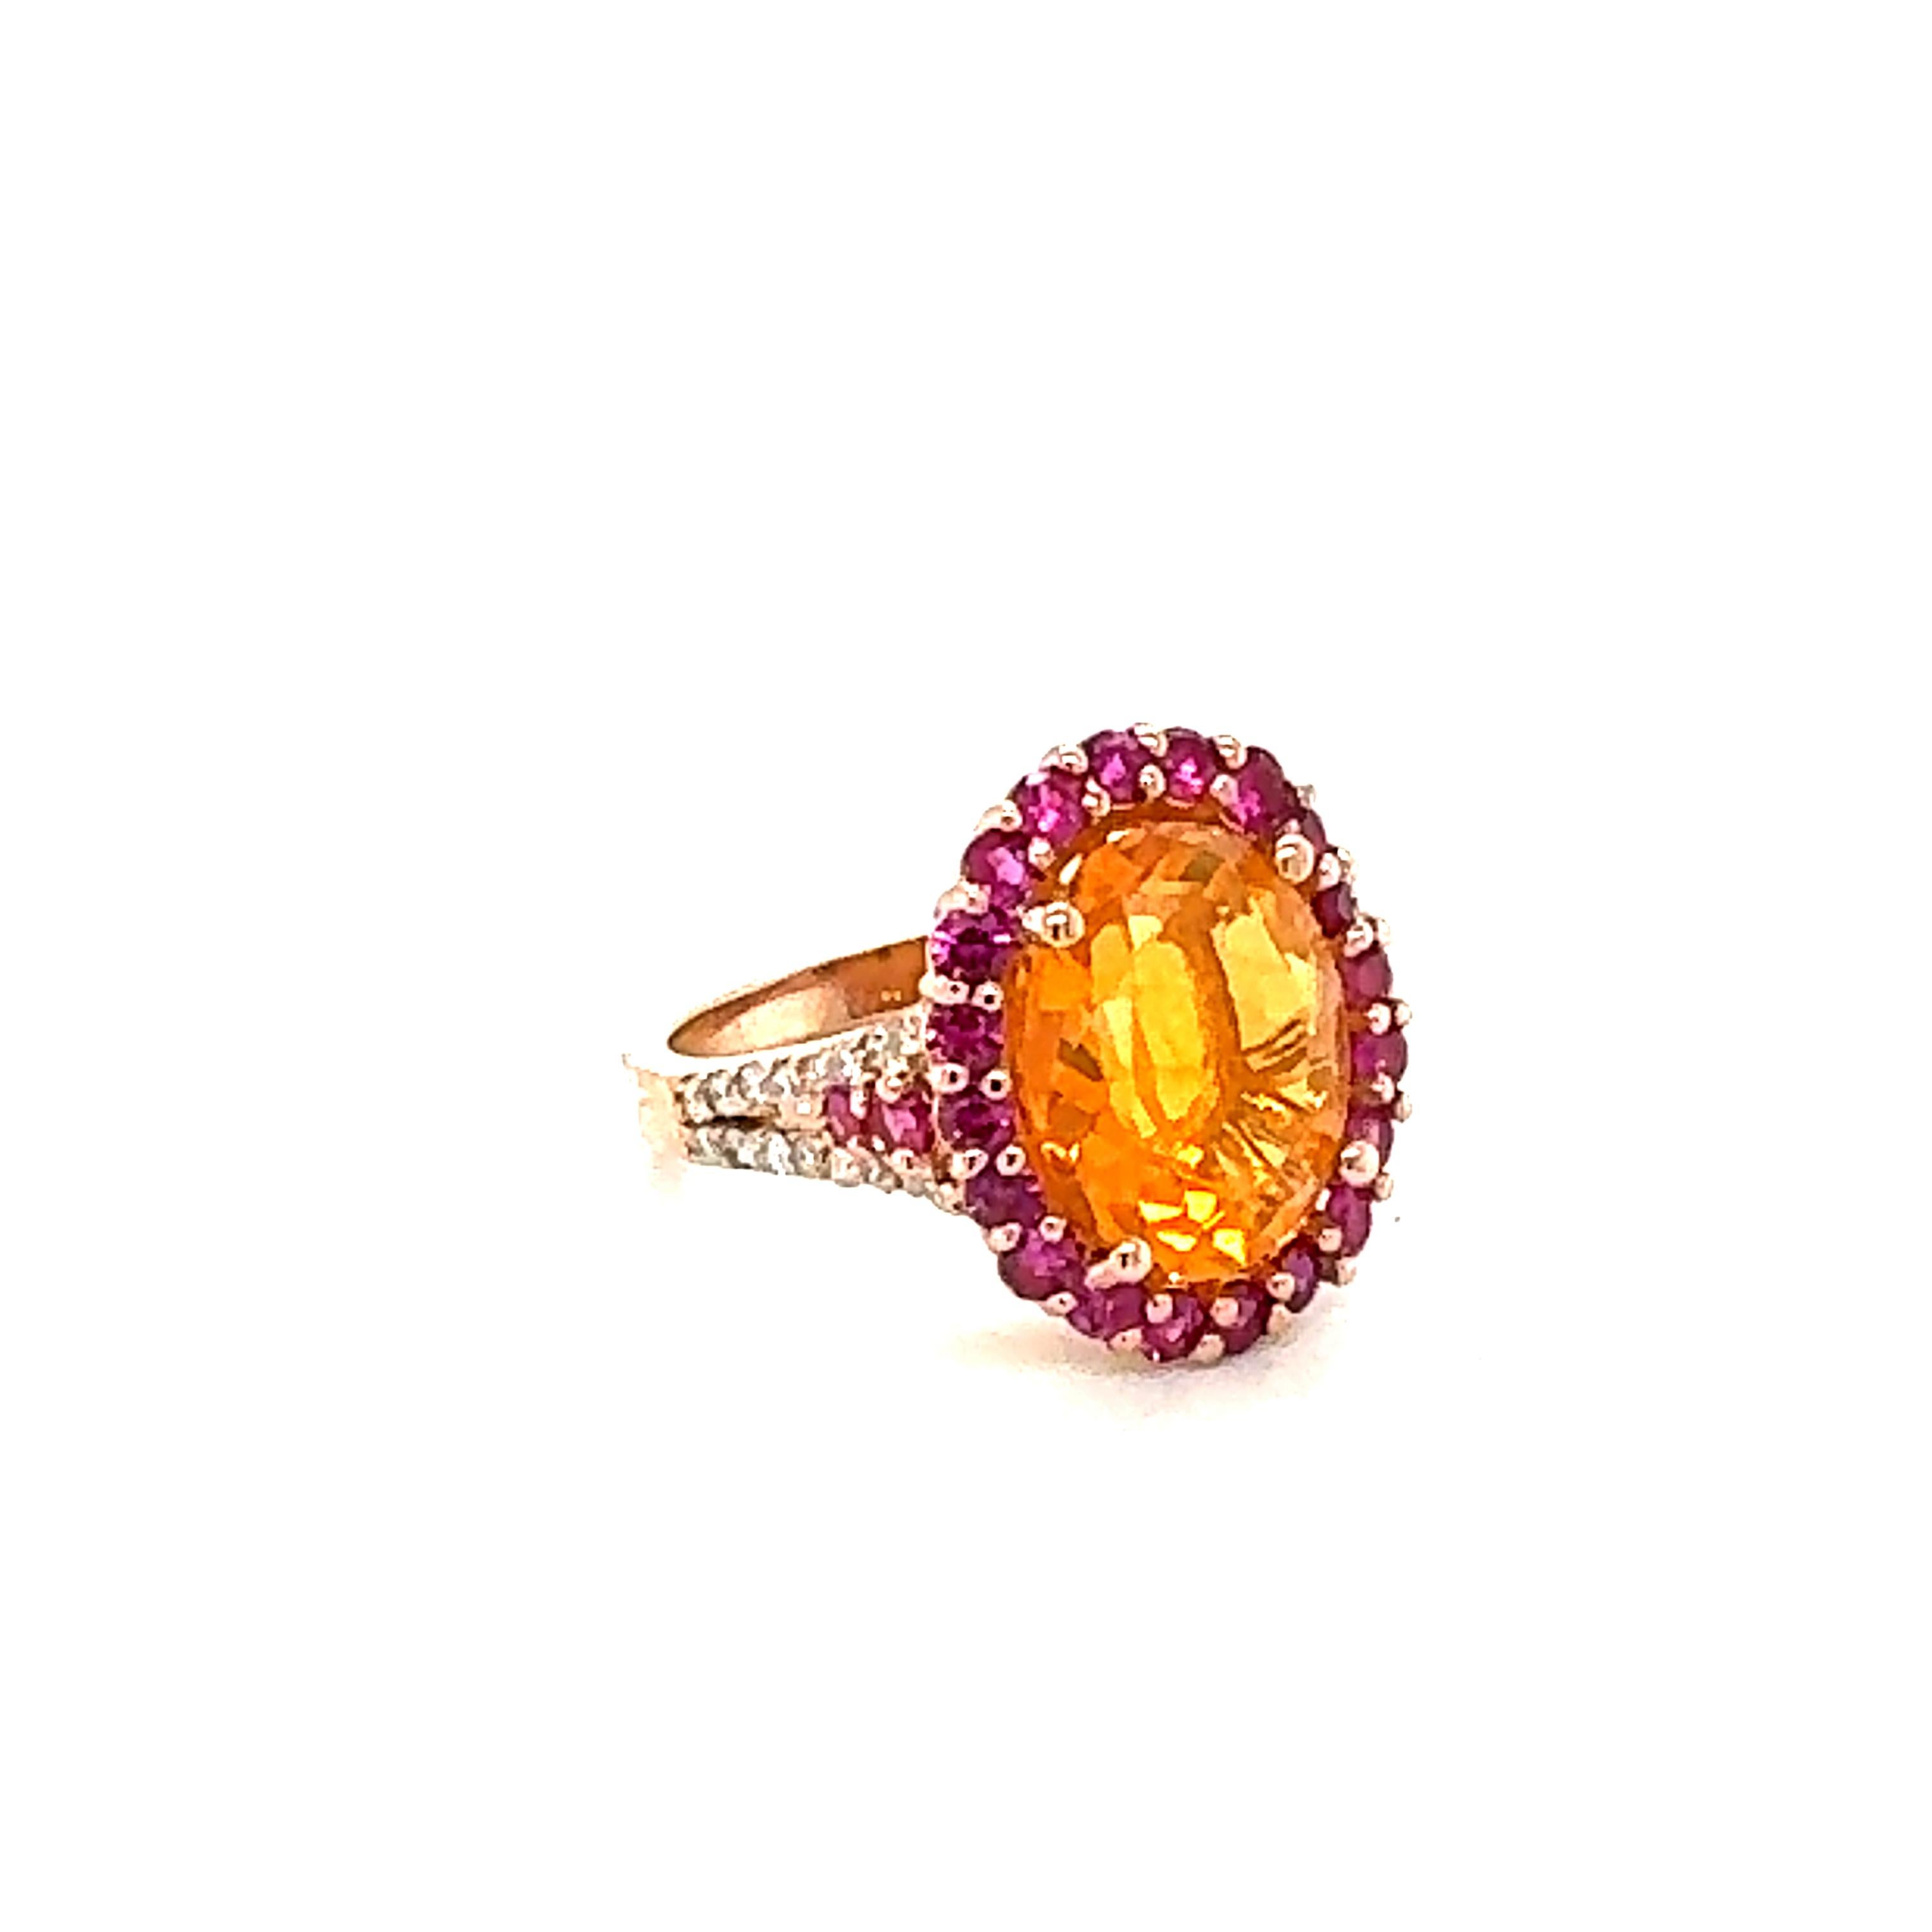 5.27 Carat Oval Cut Fire Opal Sapphire Diamond Yellow Gold Cocktail Ring

This ring has a 3.76 Carat Oval Cut Orange Fire Opal as its center stone and is elegantly surrounded by 24 Round Cut Pink Sapphires that weigh 1.20 Carats and 32 Round Cut